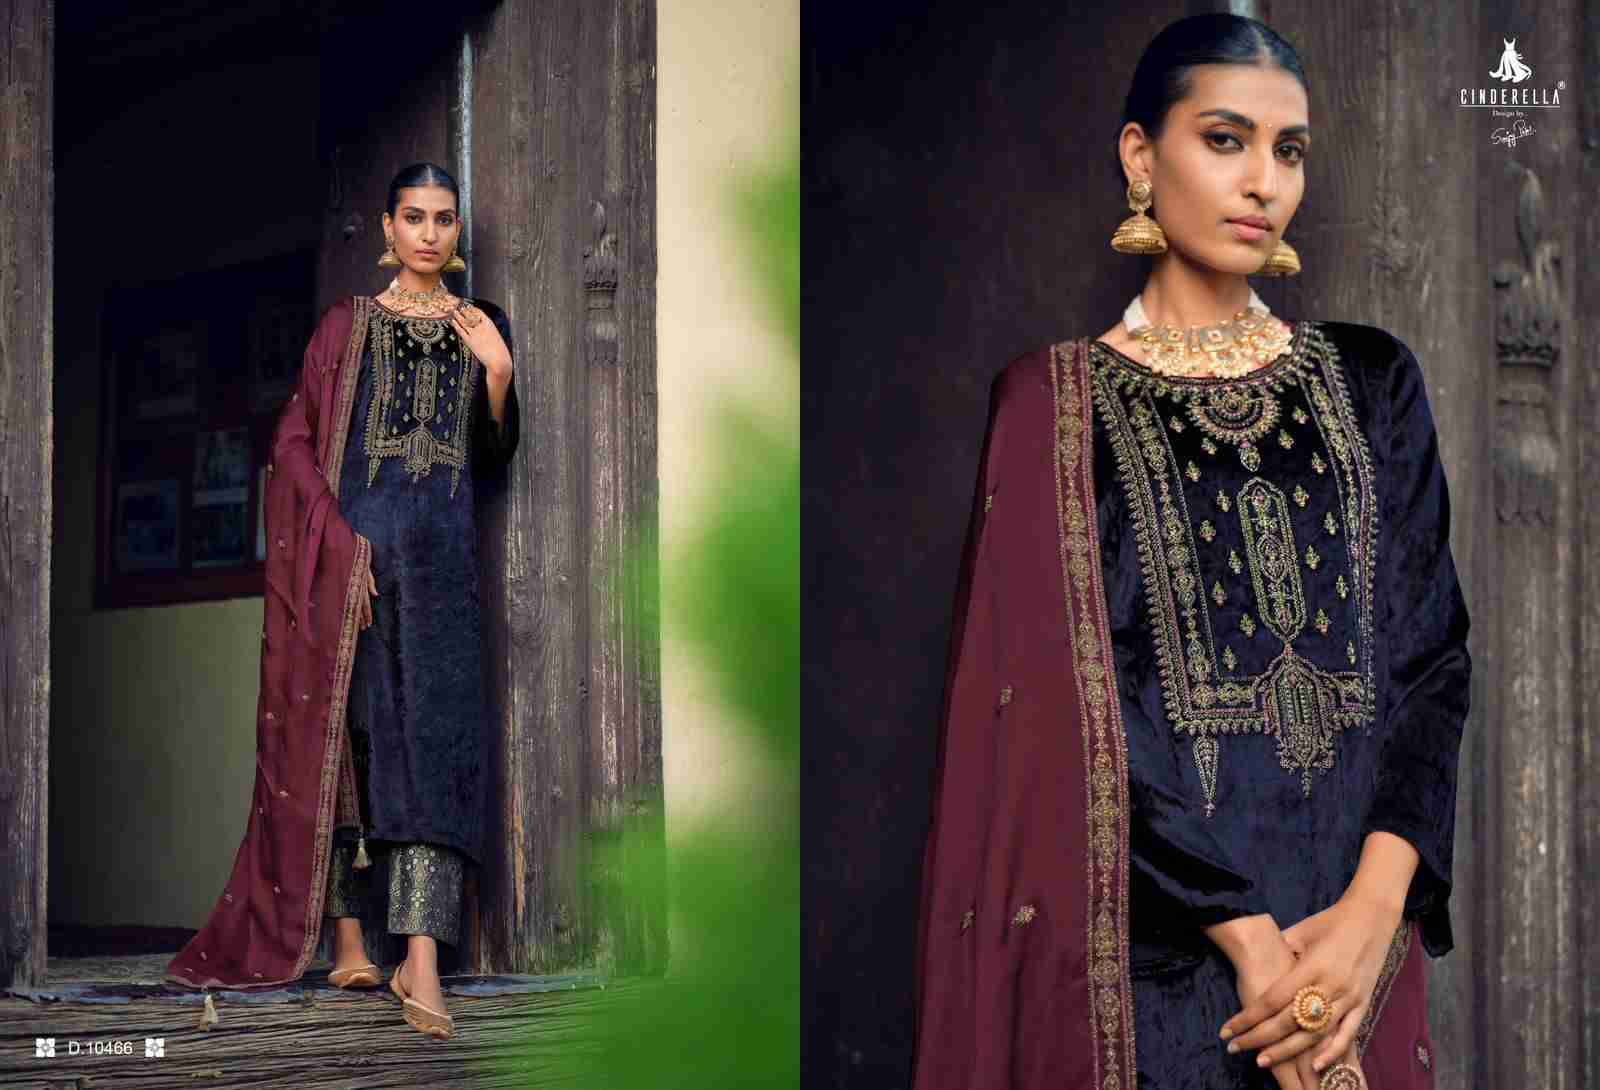 Calista By Cinderella 10461 To 10468 Series Beautiful Stylish Festive Suits Fancy Colorful Casual Wear & Ethnic Wear & Ready To Wear Pure Viscose Velvet Dresses At Wholesale Price